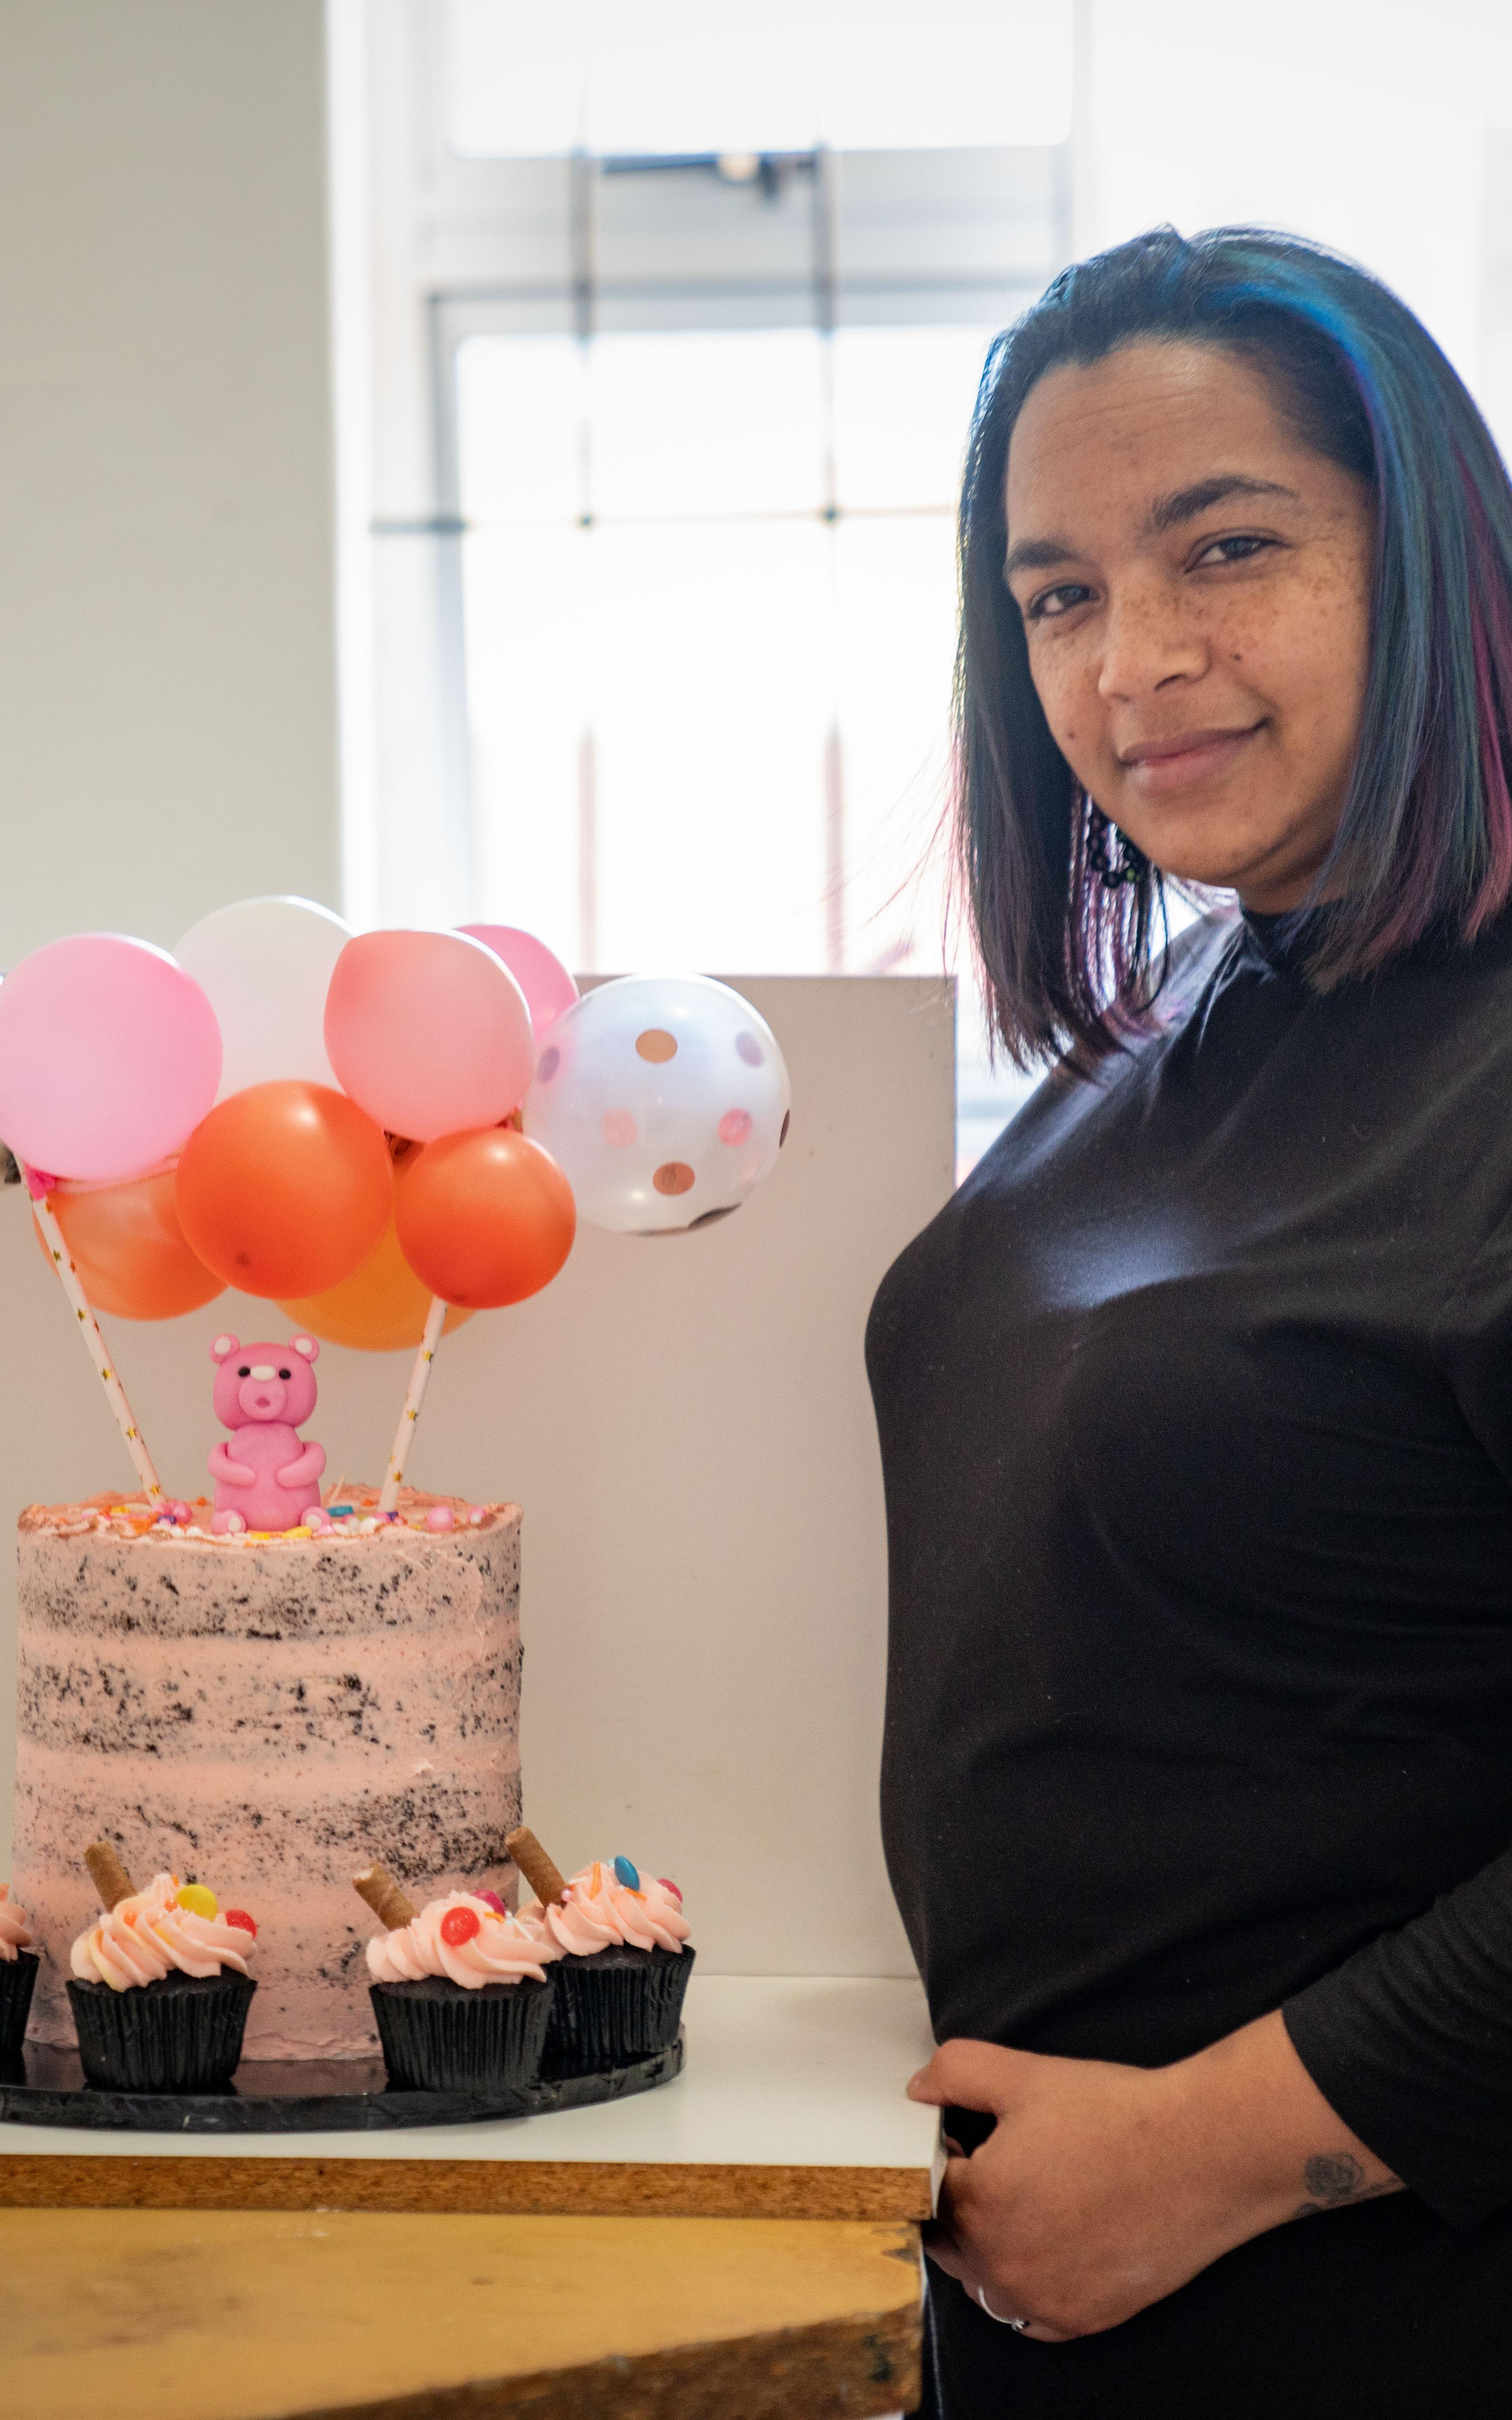 Beautiful News - Shaundre Lottering of Taste of Heaven standing beside one of her cake creations